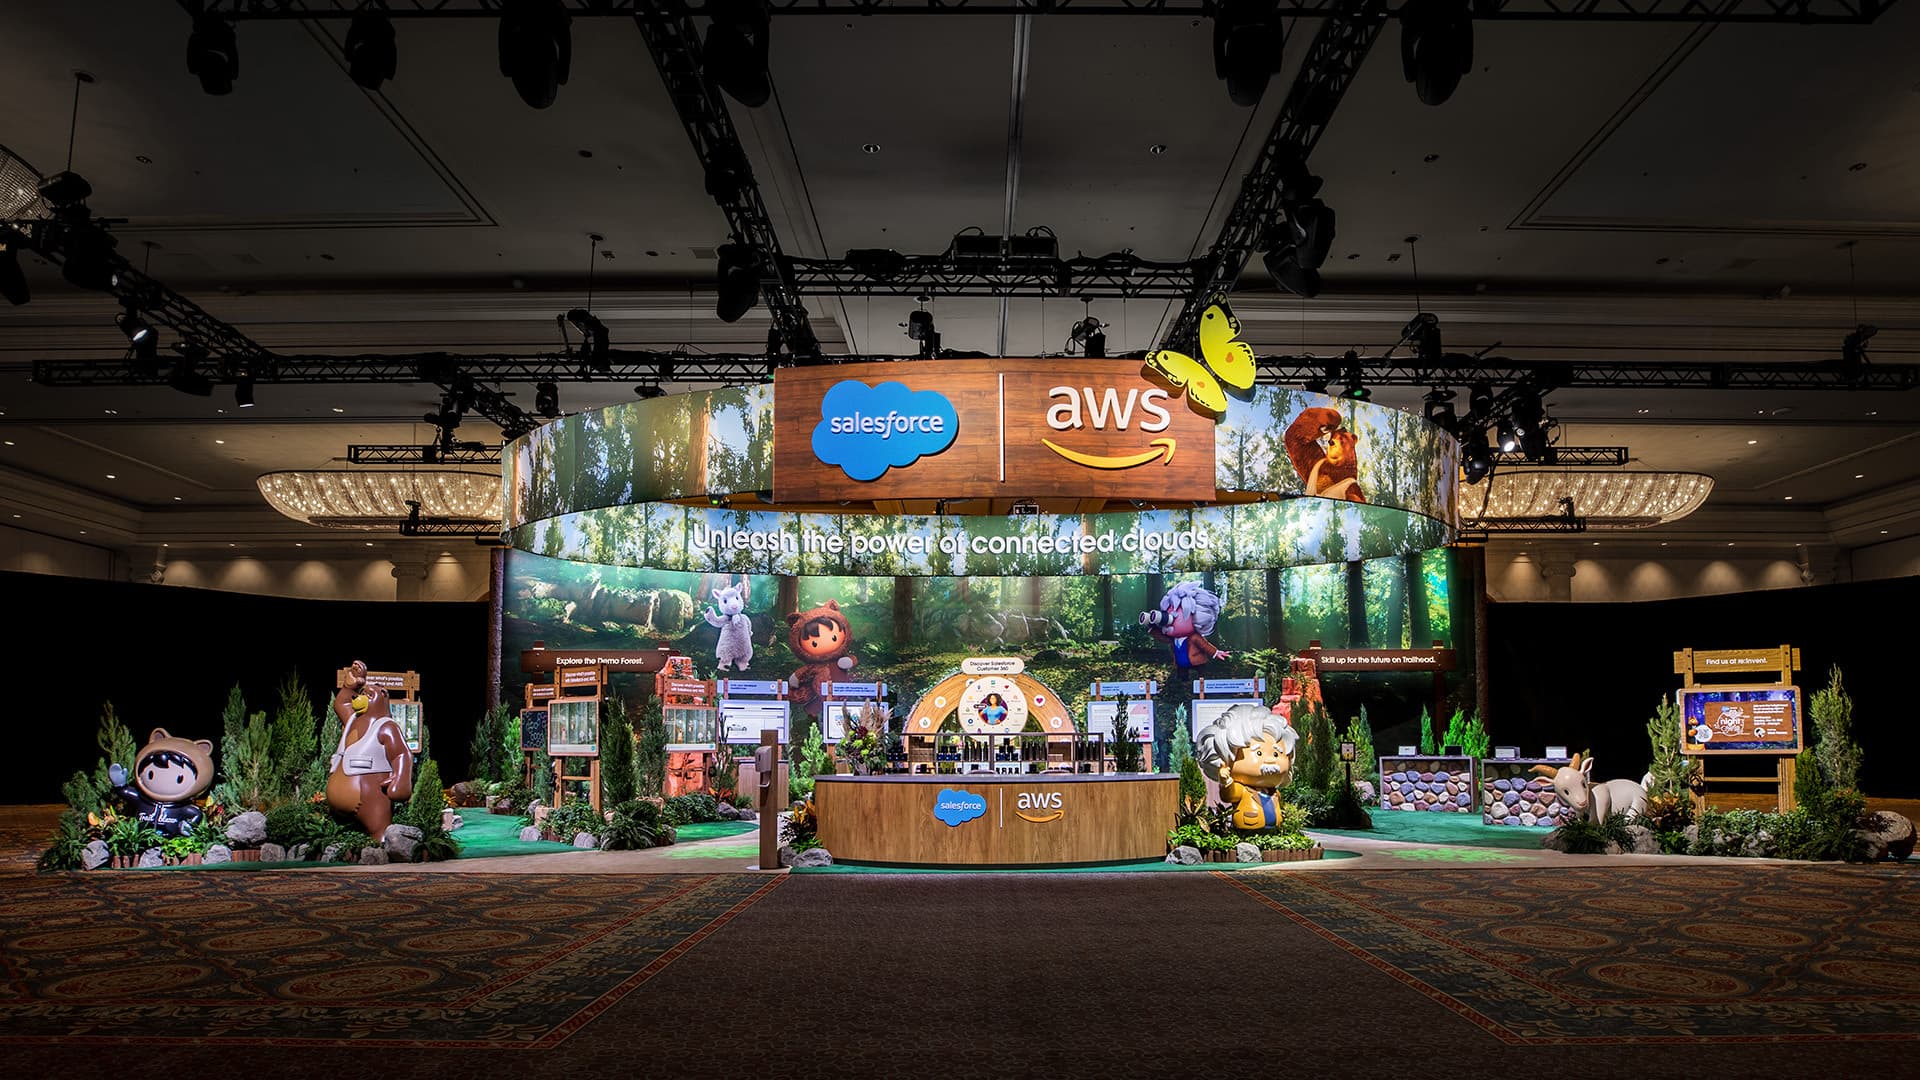 Salesforce AWS re:Invent Sparks Marketing Reality